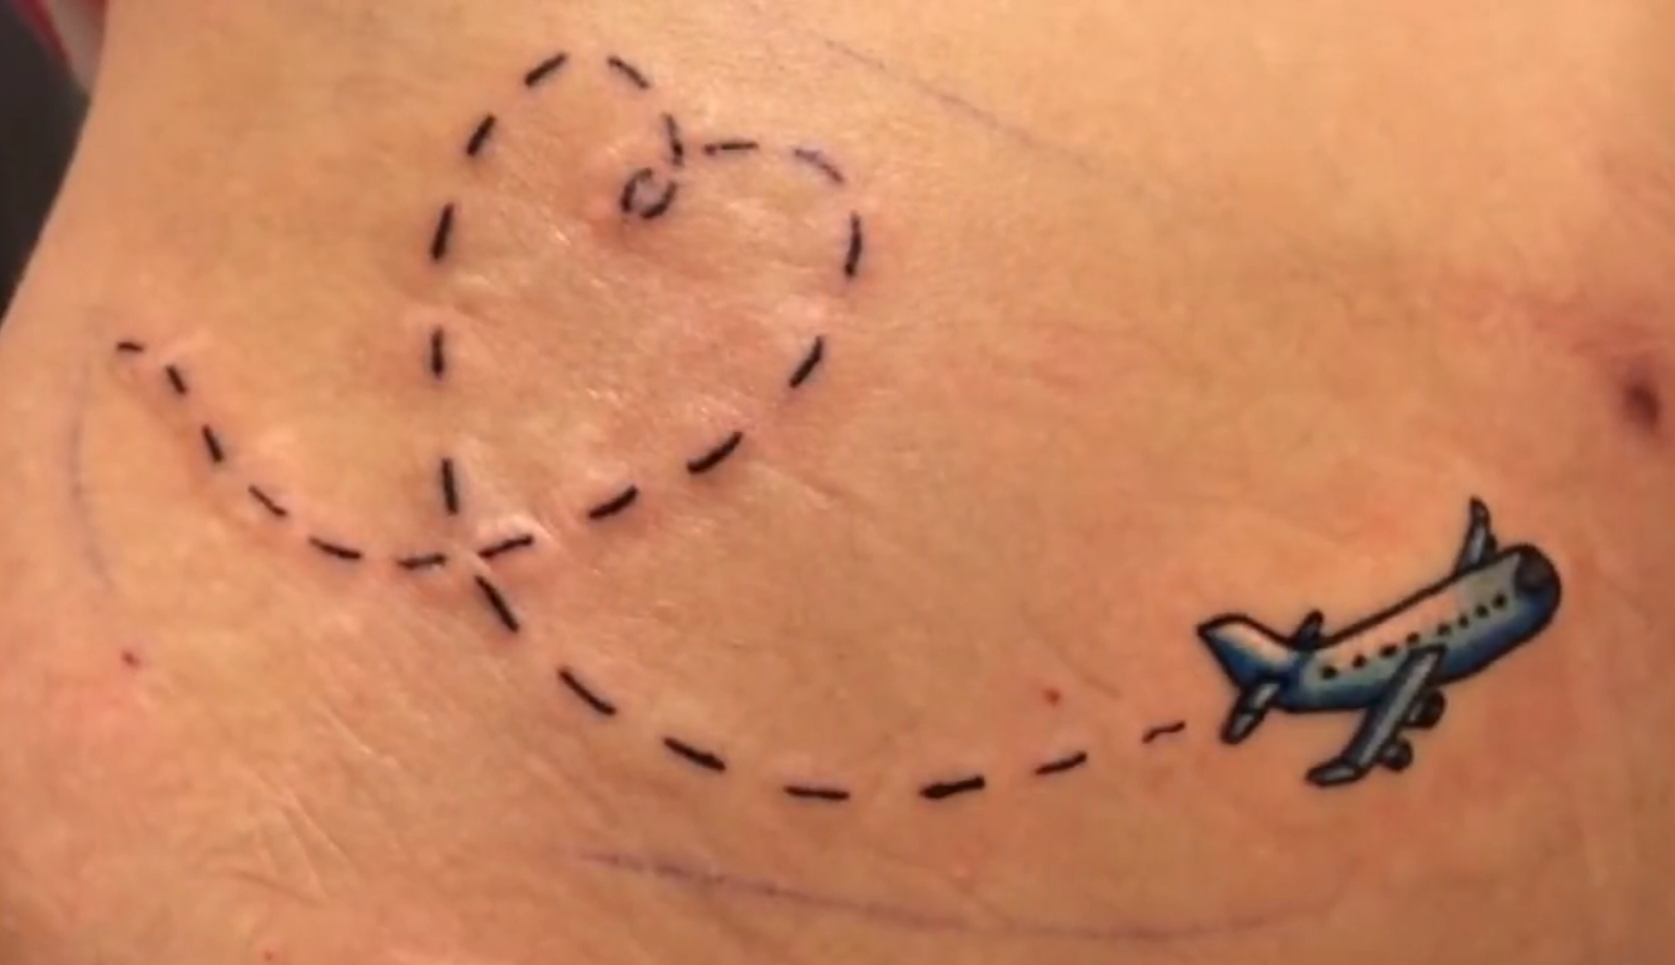 The Pros and Cons of Getting a Tattoo for Flight Attendants